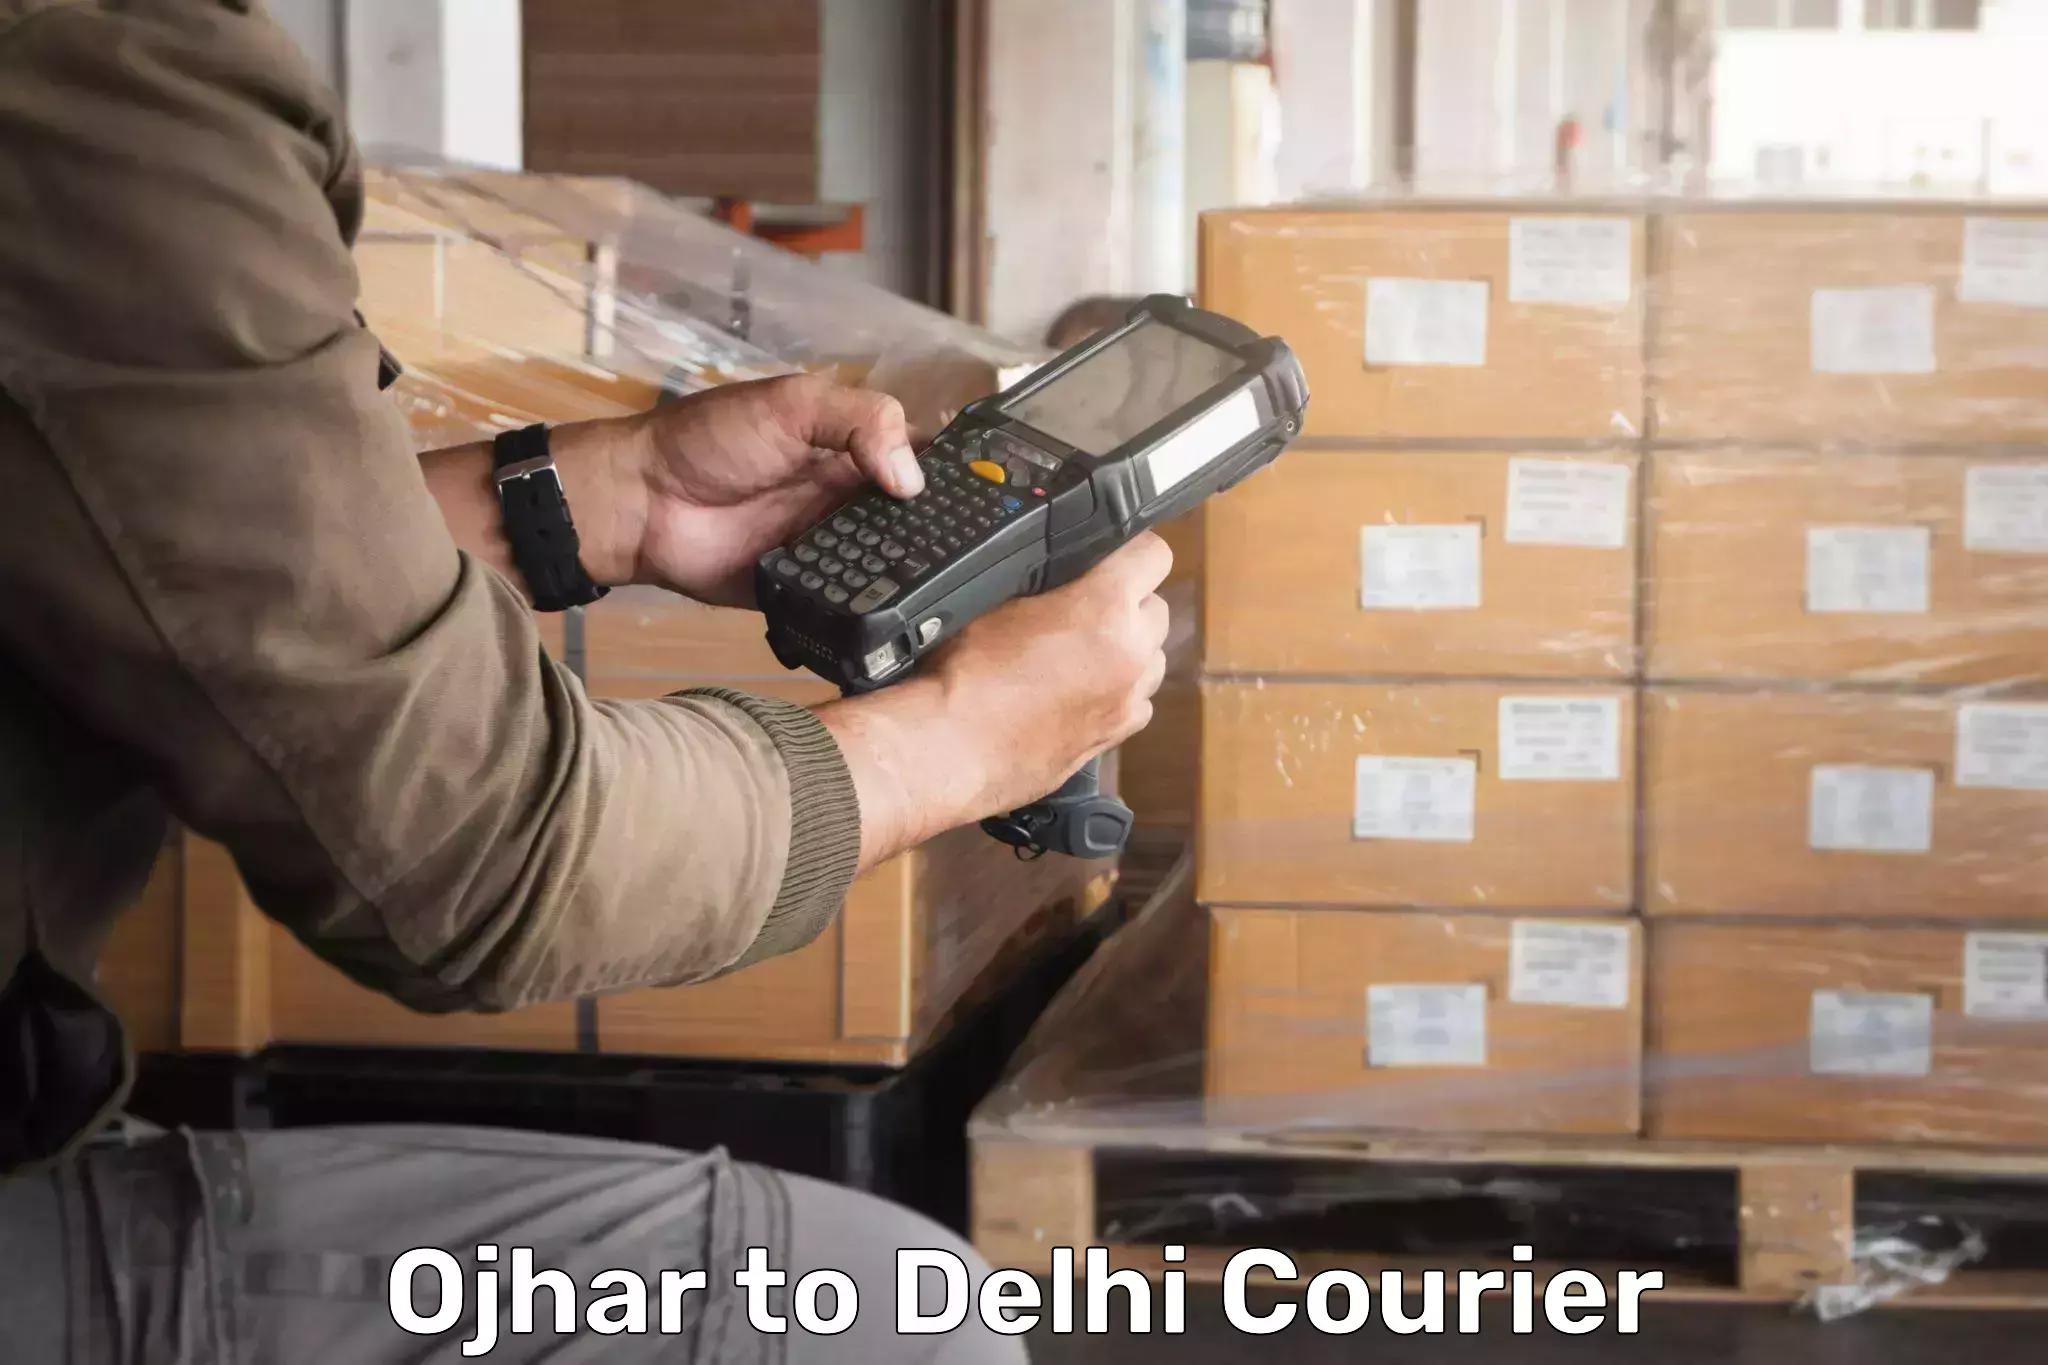 Large-scale shipping solutions Ojhar to Delhi